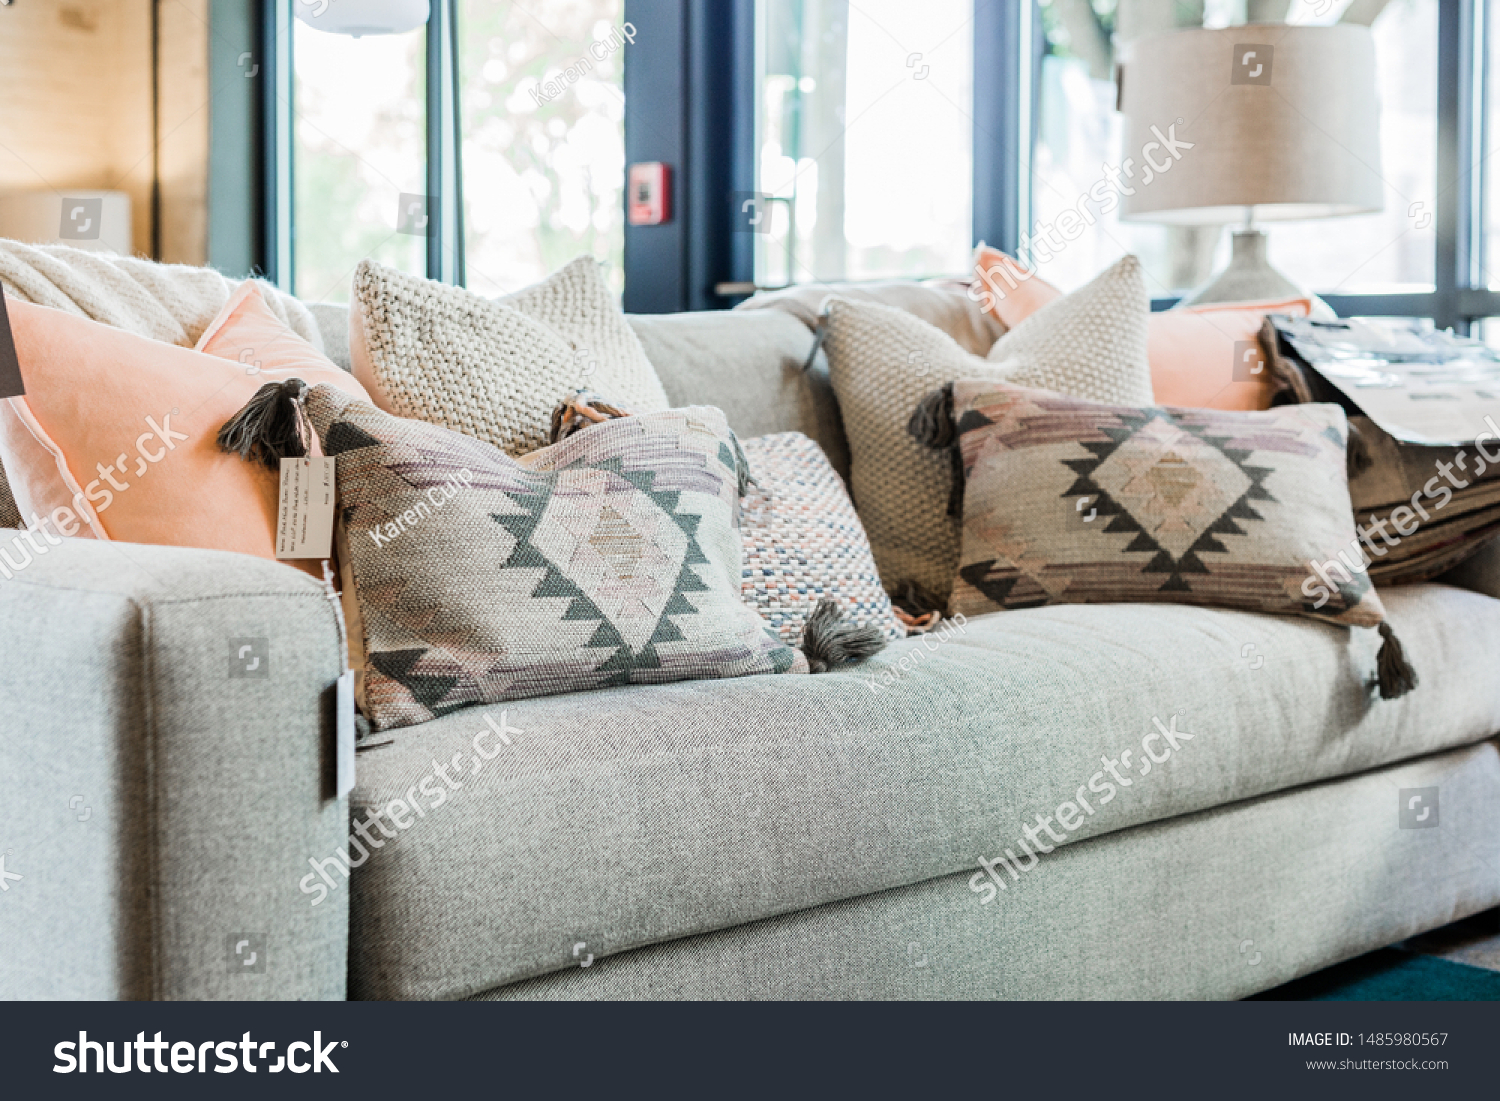 gray couch pillows